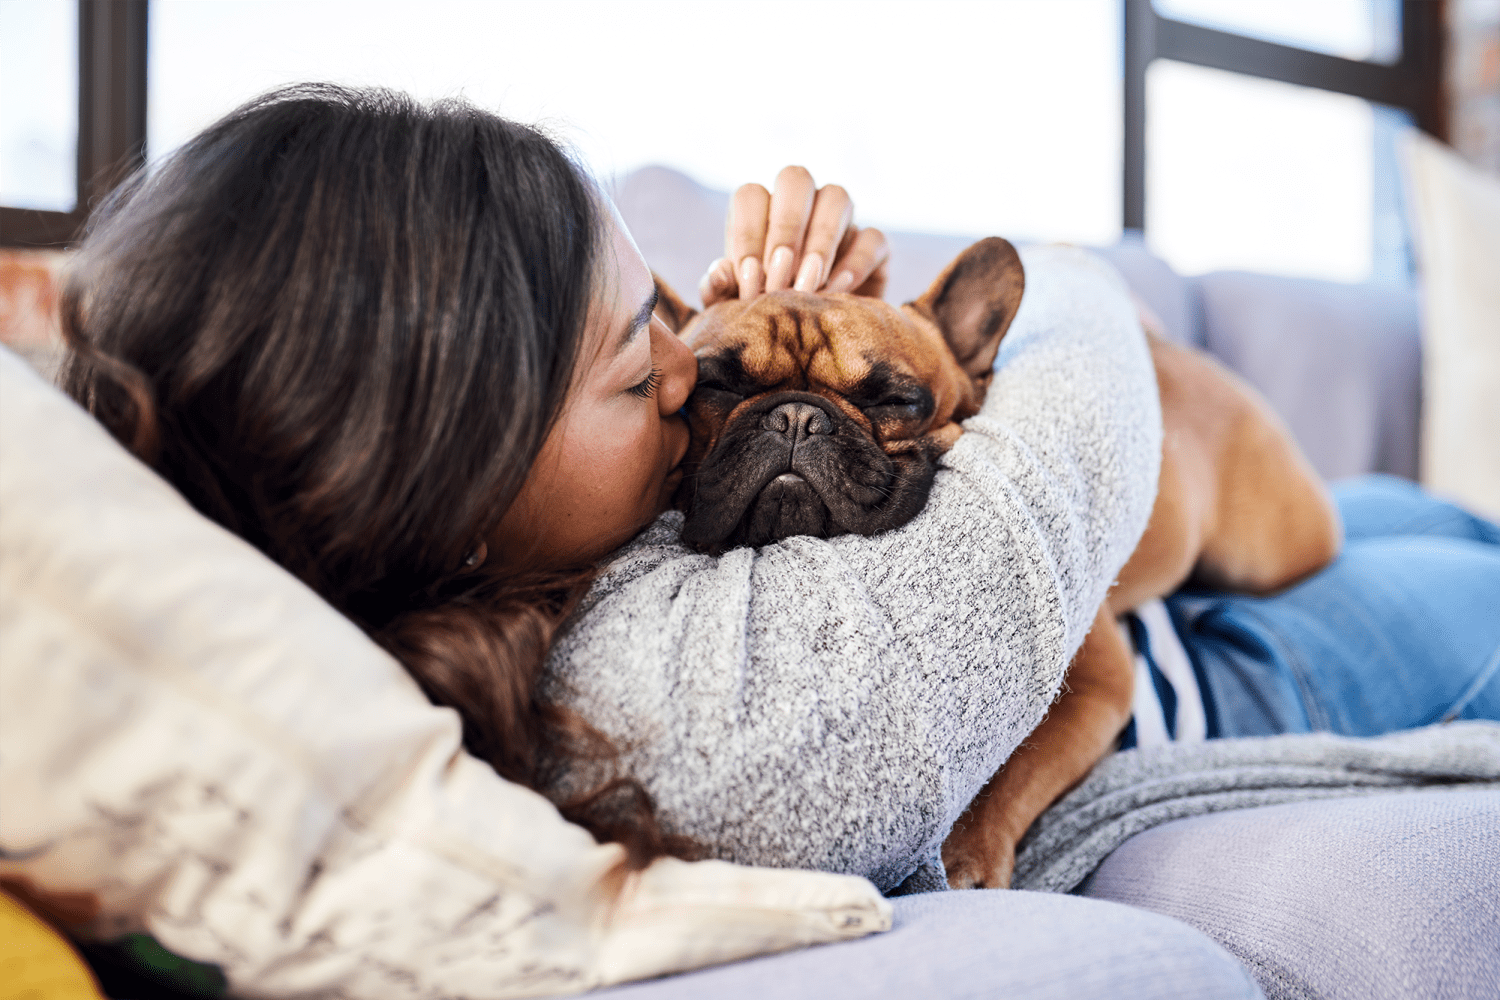 Resident snuggling with her French bulldog at Maplewood Estates Apartments in Hamburg, New York